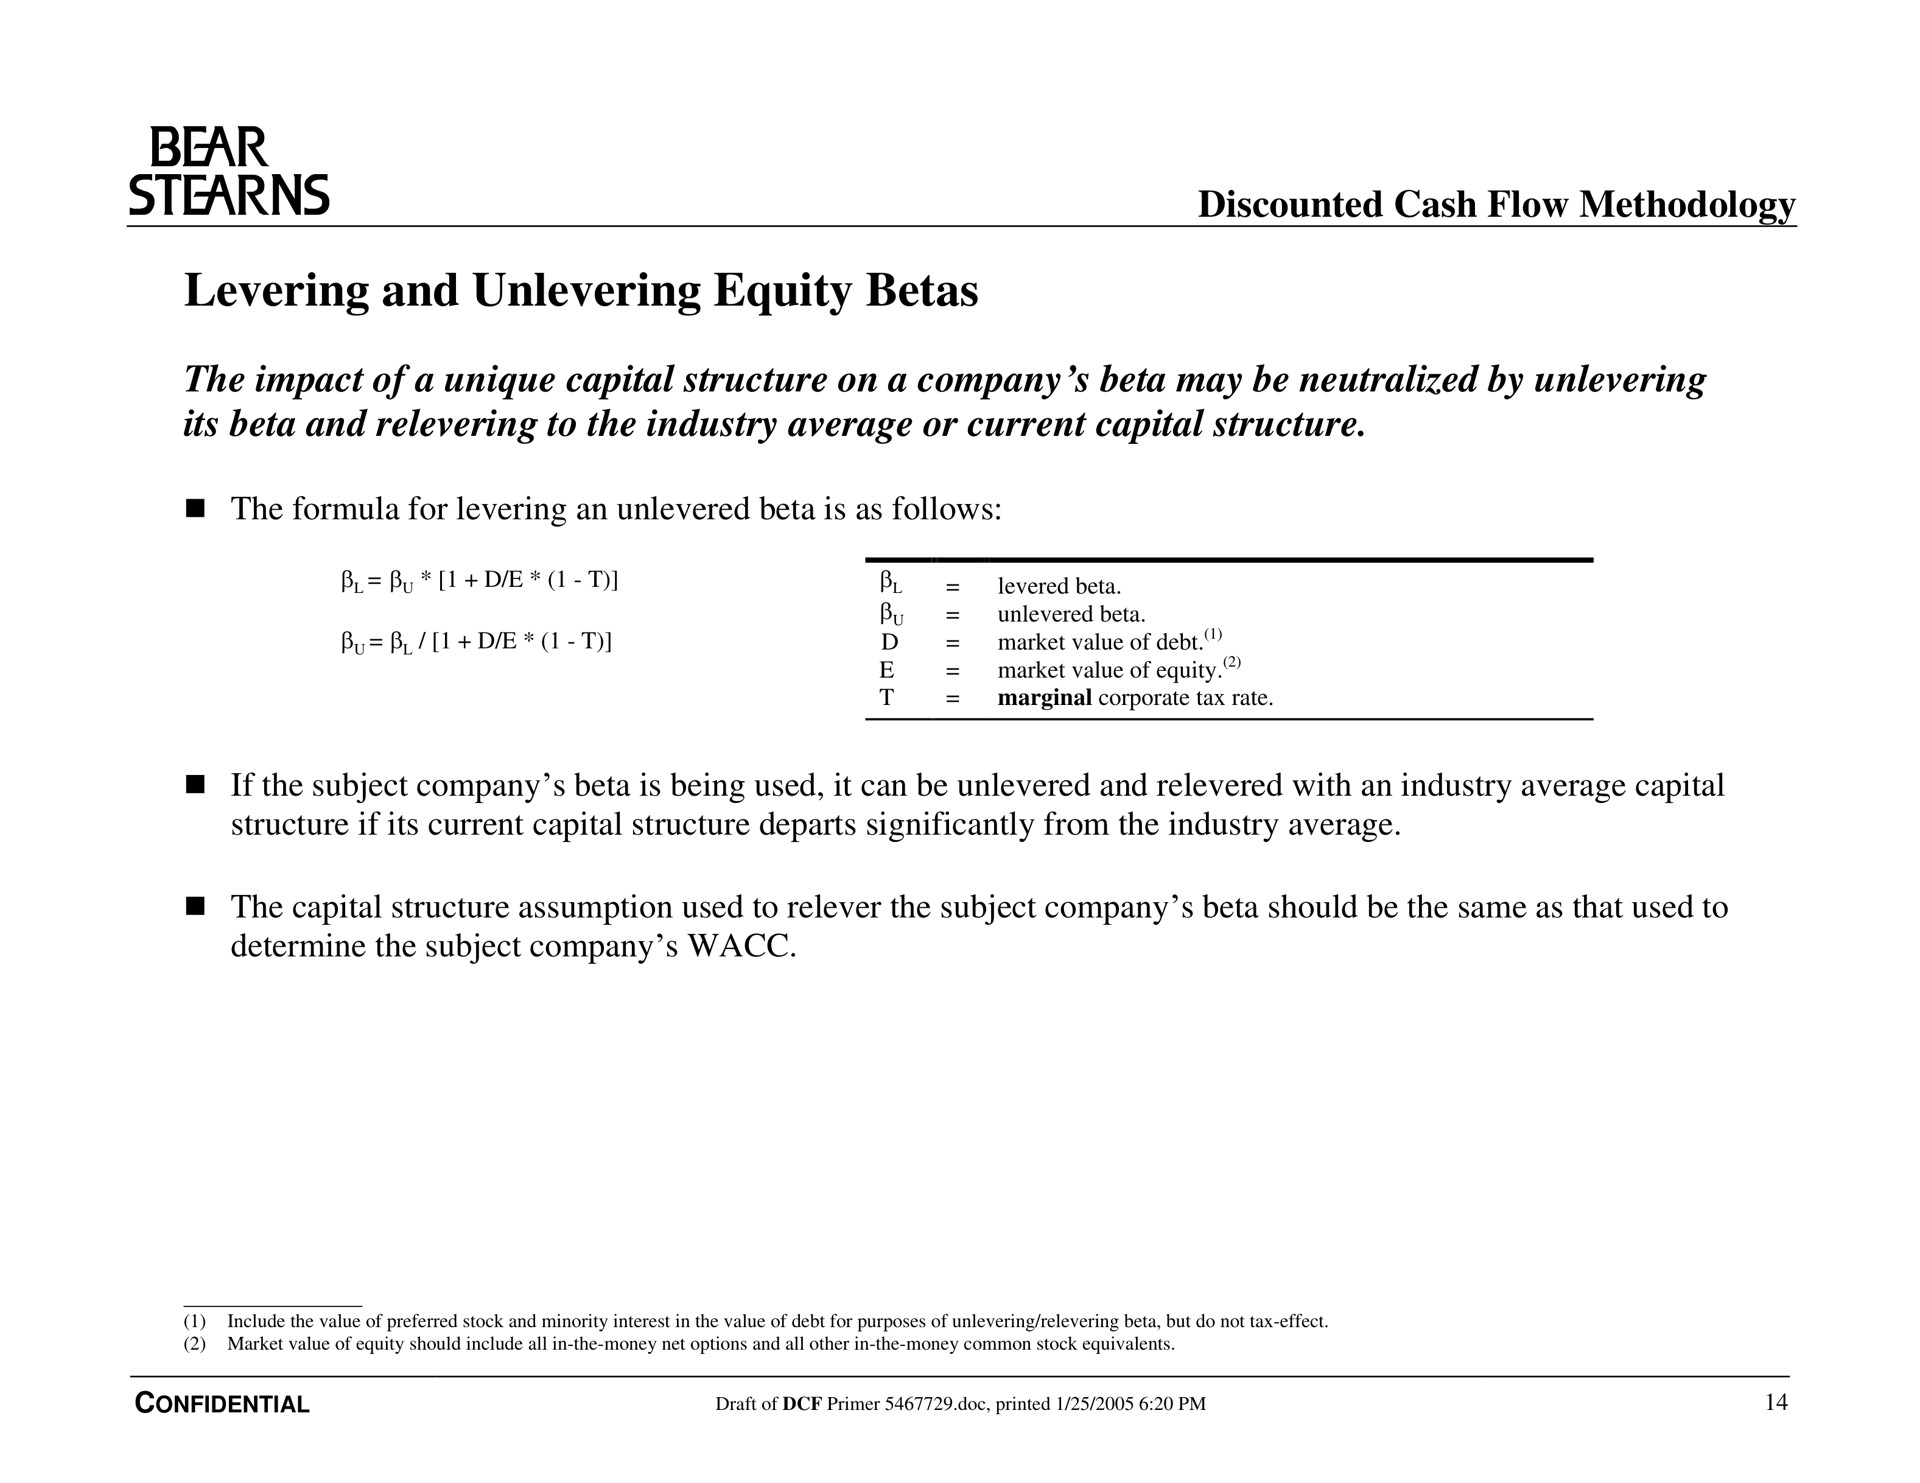 levering and equity betas bear discounted cash flow methodology | Bear Stearns